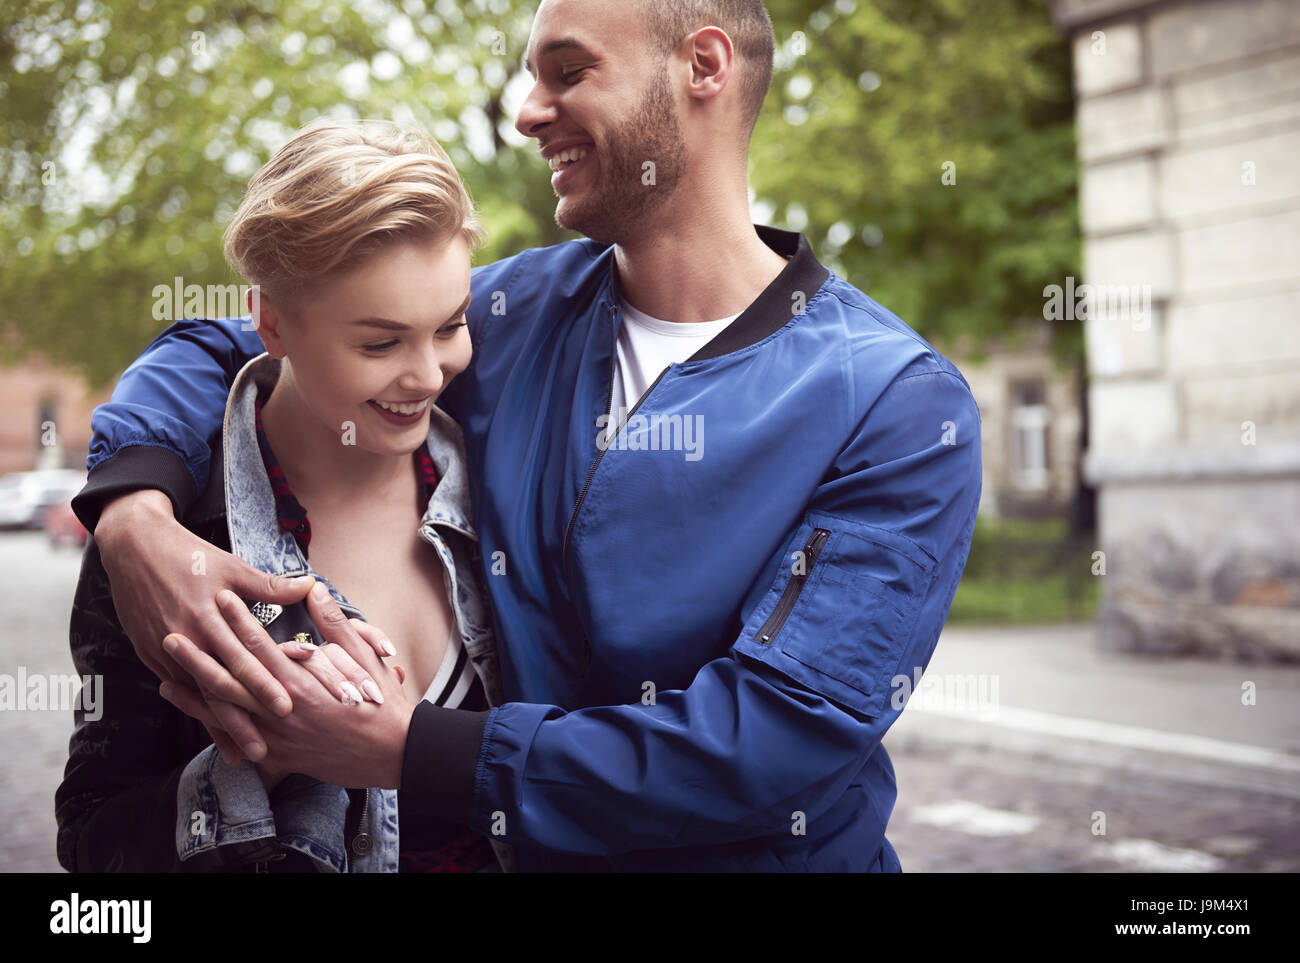 Waist up of young couple embracing in the city Stock Photo